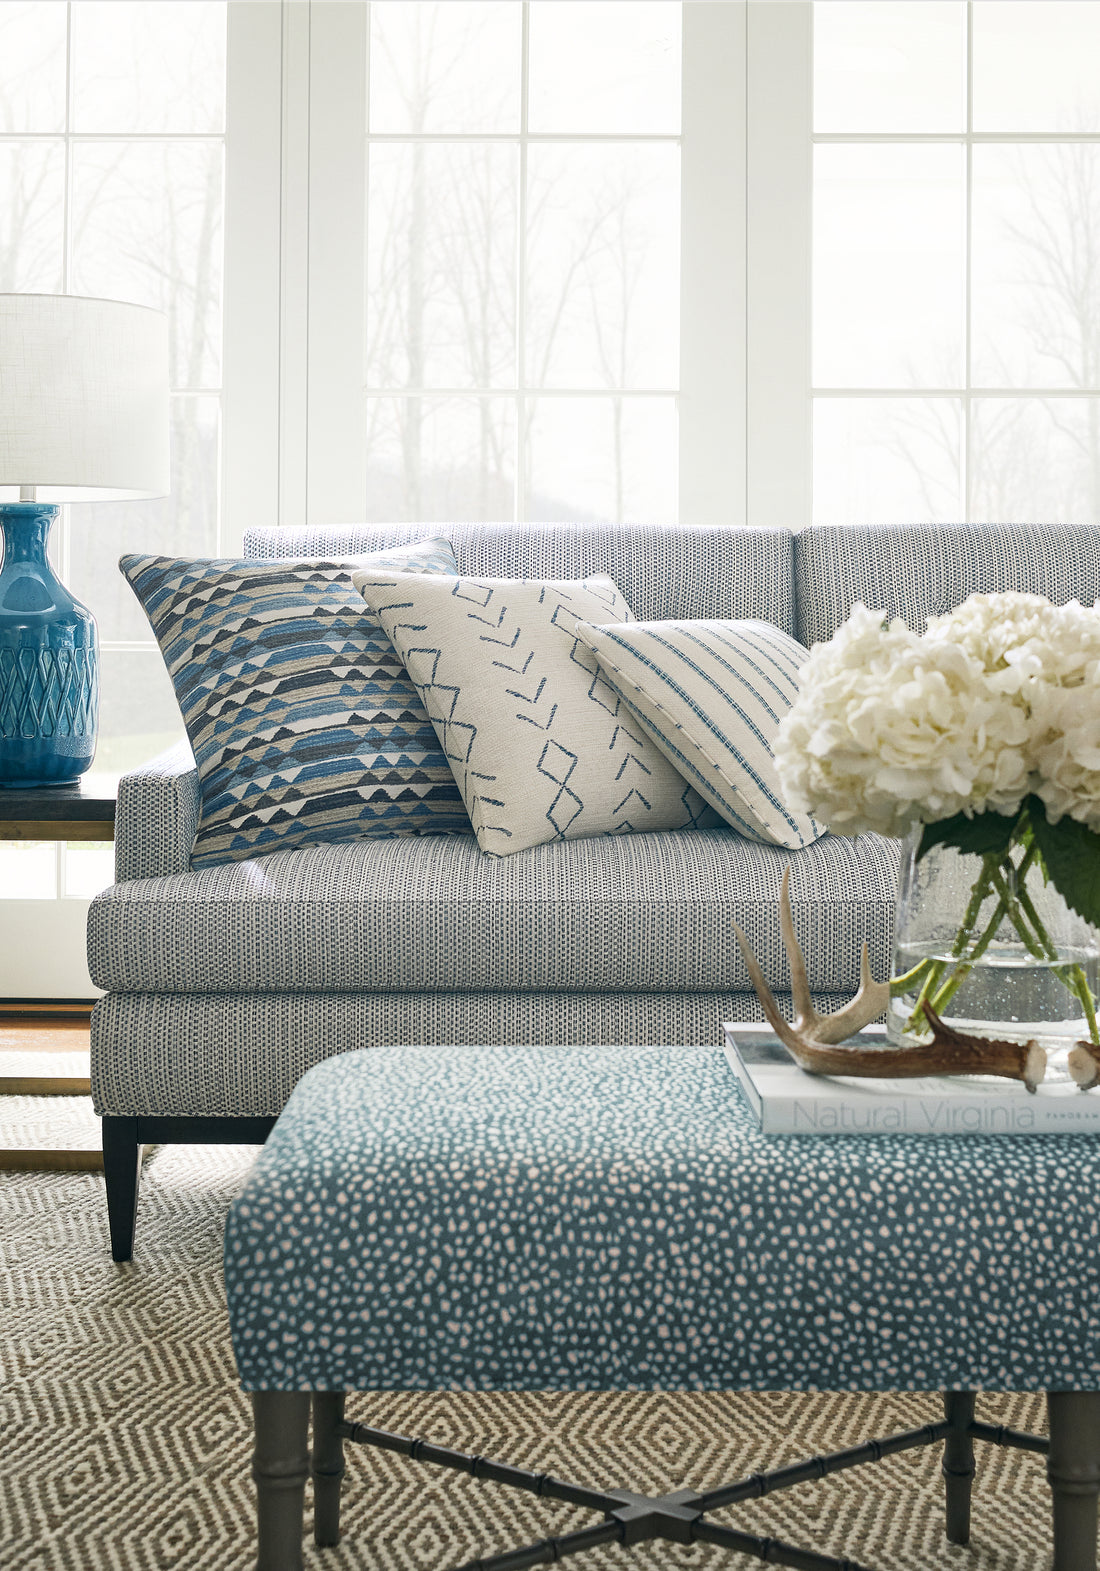 Dixon Loveseat in Sequoia woven fabric in Waterfall color - pattern number W78370 - by Thibaut in the Sierra collection